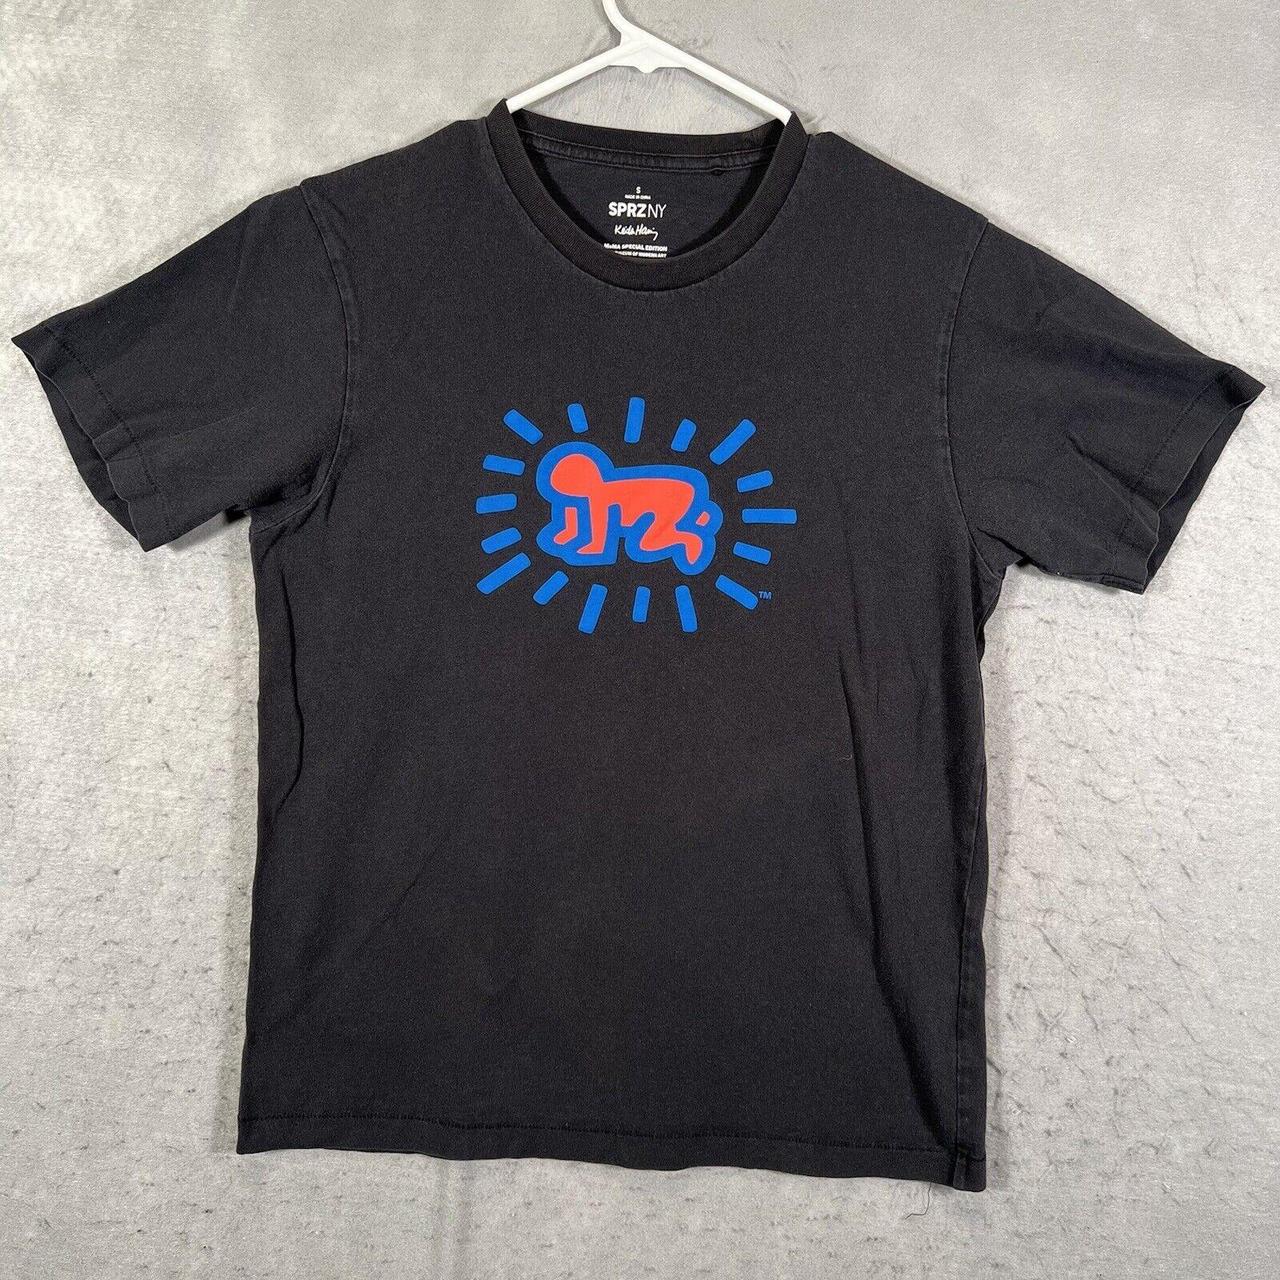 A1 UNIQLO KEITH HARING MOMA SPECIAL EDITION T-SHIRT... - Depop